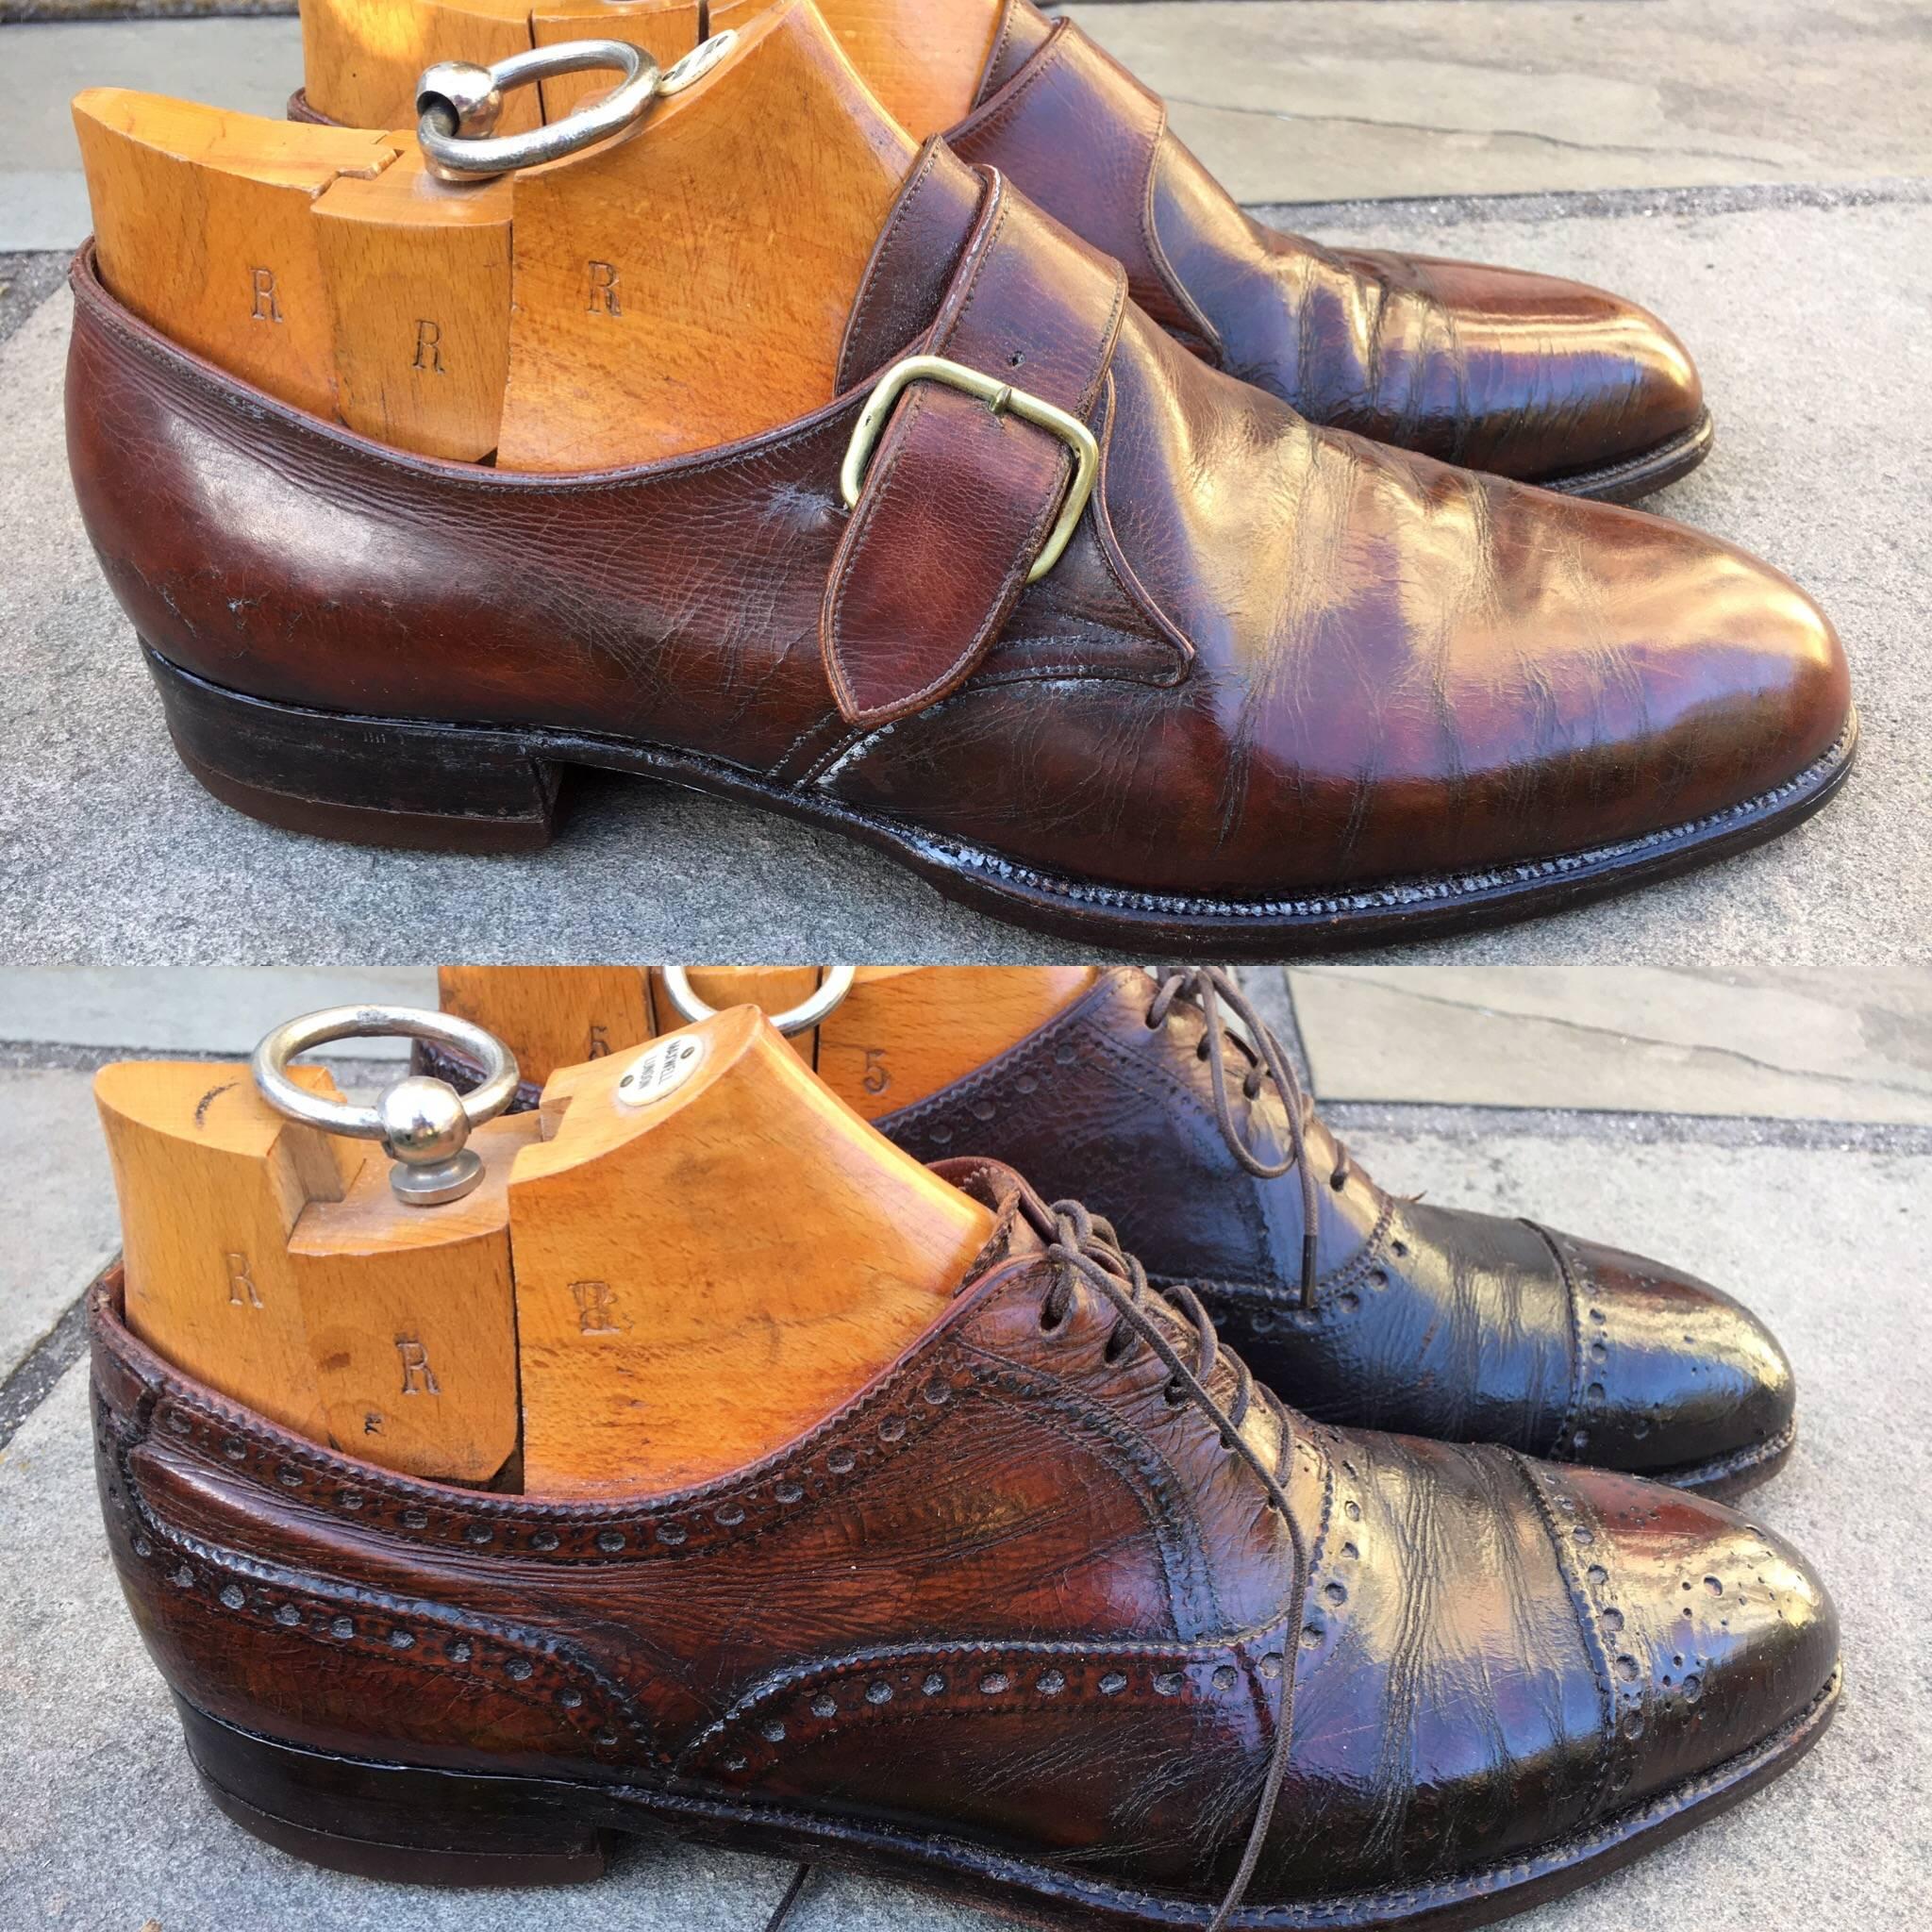 Hand crafted in Paris for a French count, this collection of 12 pair of shoes includes brogues, monk straps and saddle shoes.
Henry Maxwell has been hand crafting men's shoes since 1750, and opened a branch in paris in the late 1800's.
This